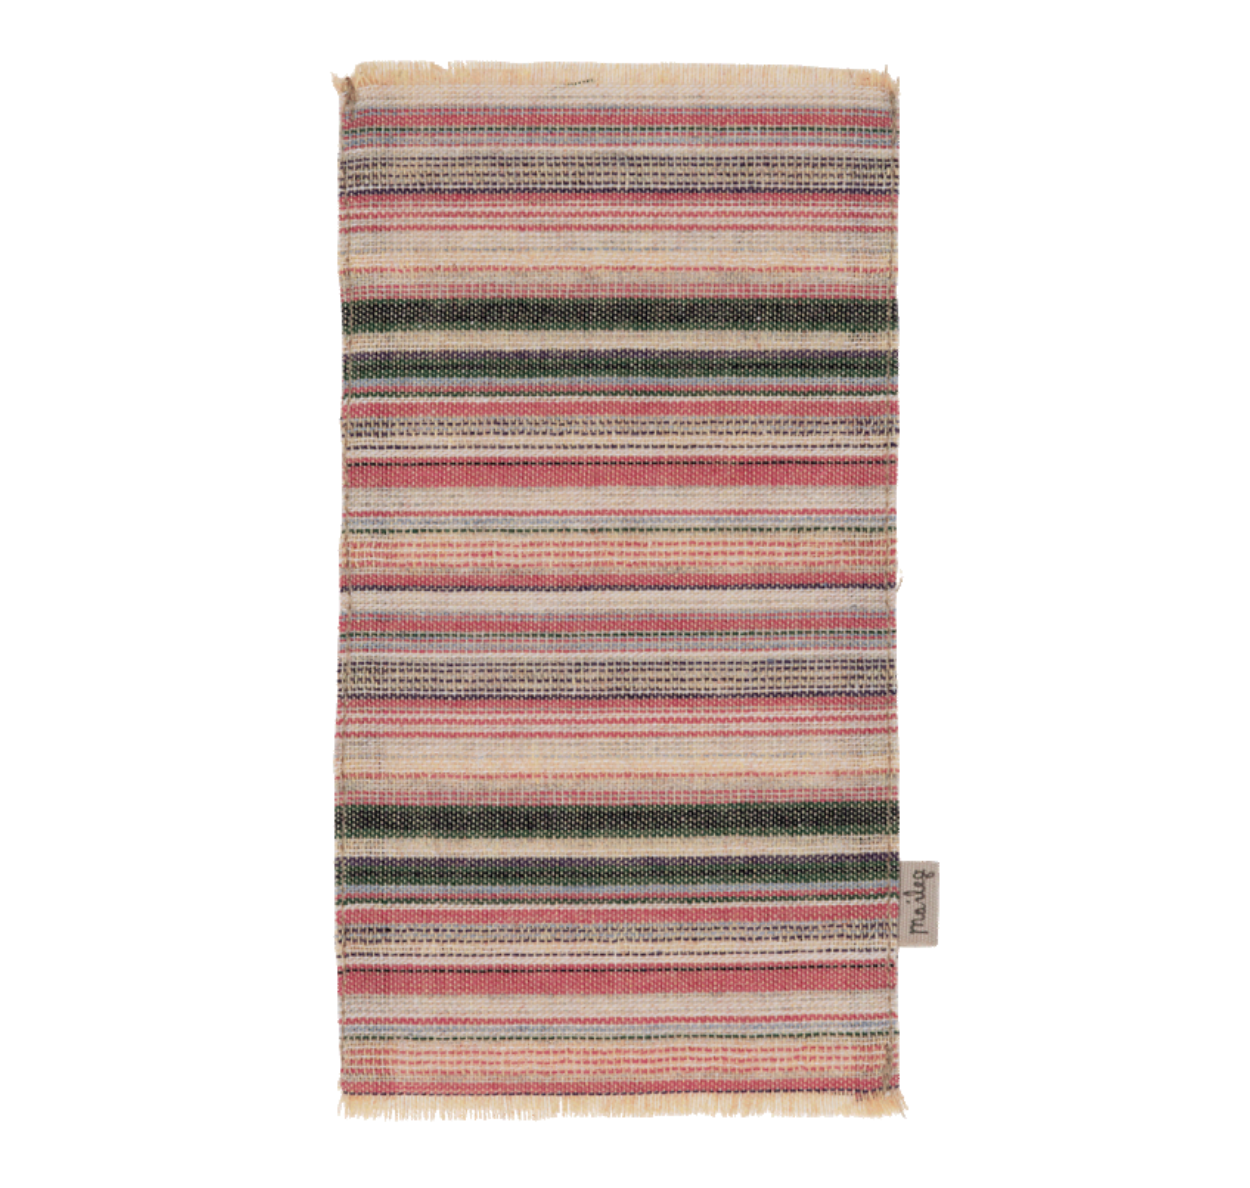 Miniature Rug, Striped by Maileg